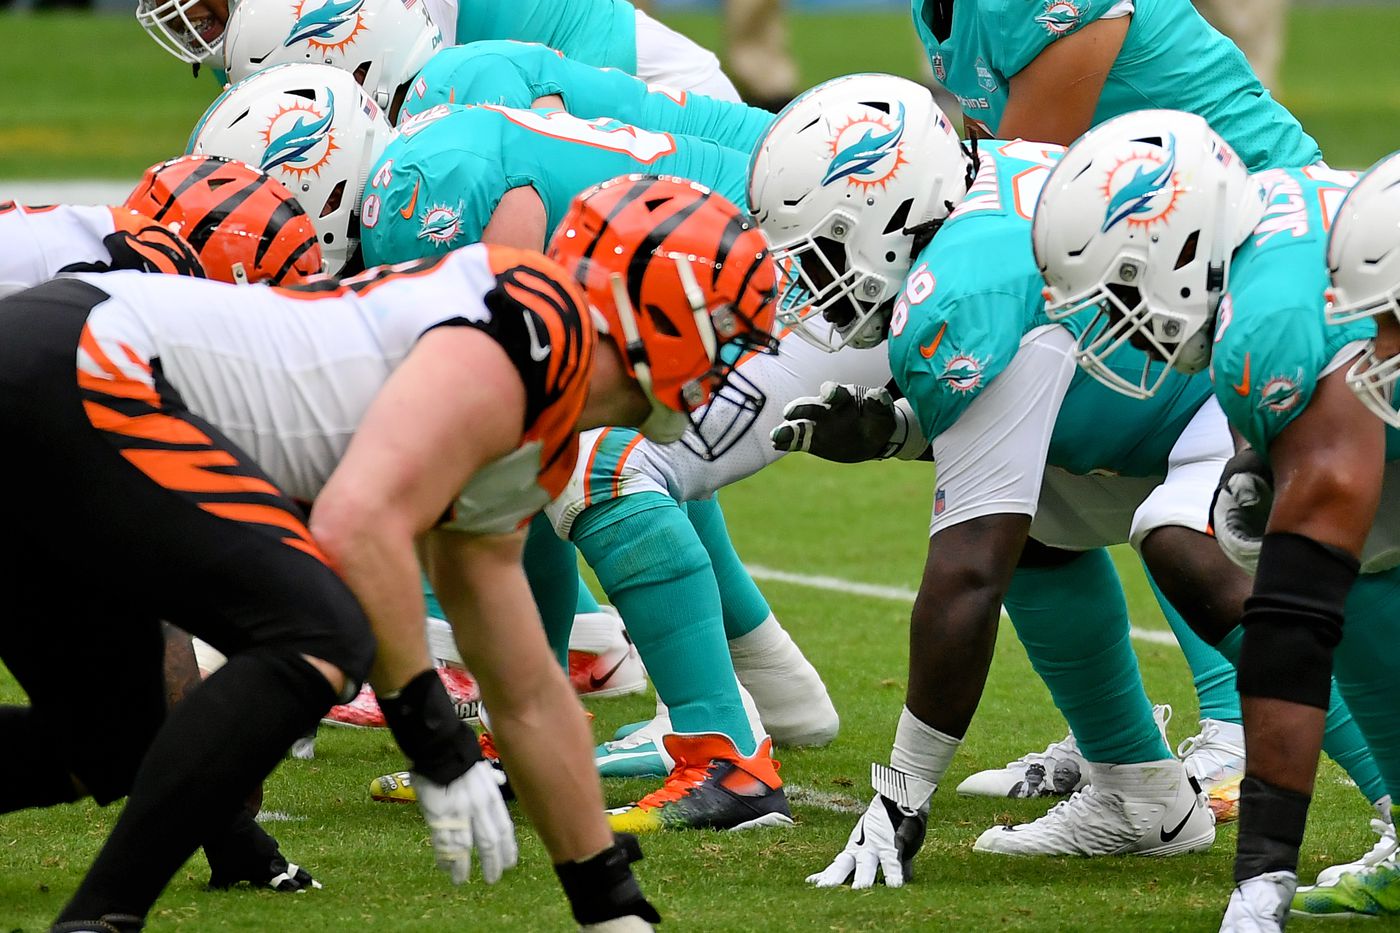 Cincinnati Bengals vs Miami Dolphins: Everything to know for NFL Week 4 -  Cincy Jungle